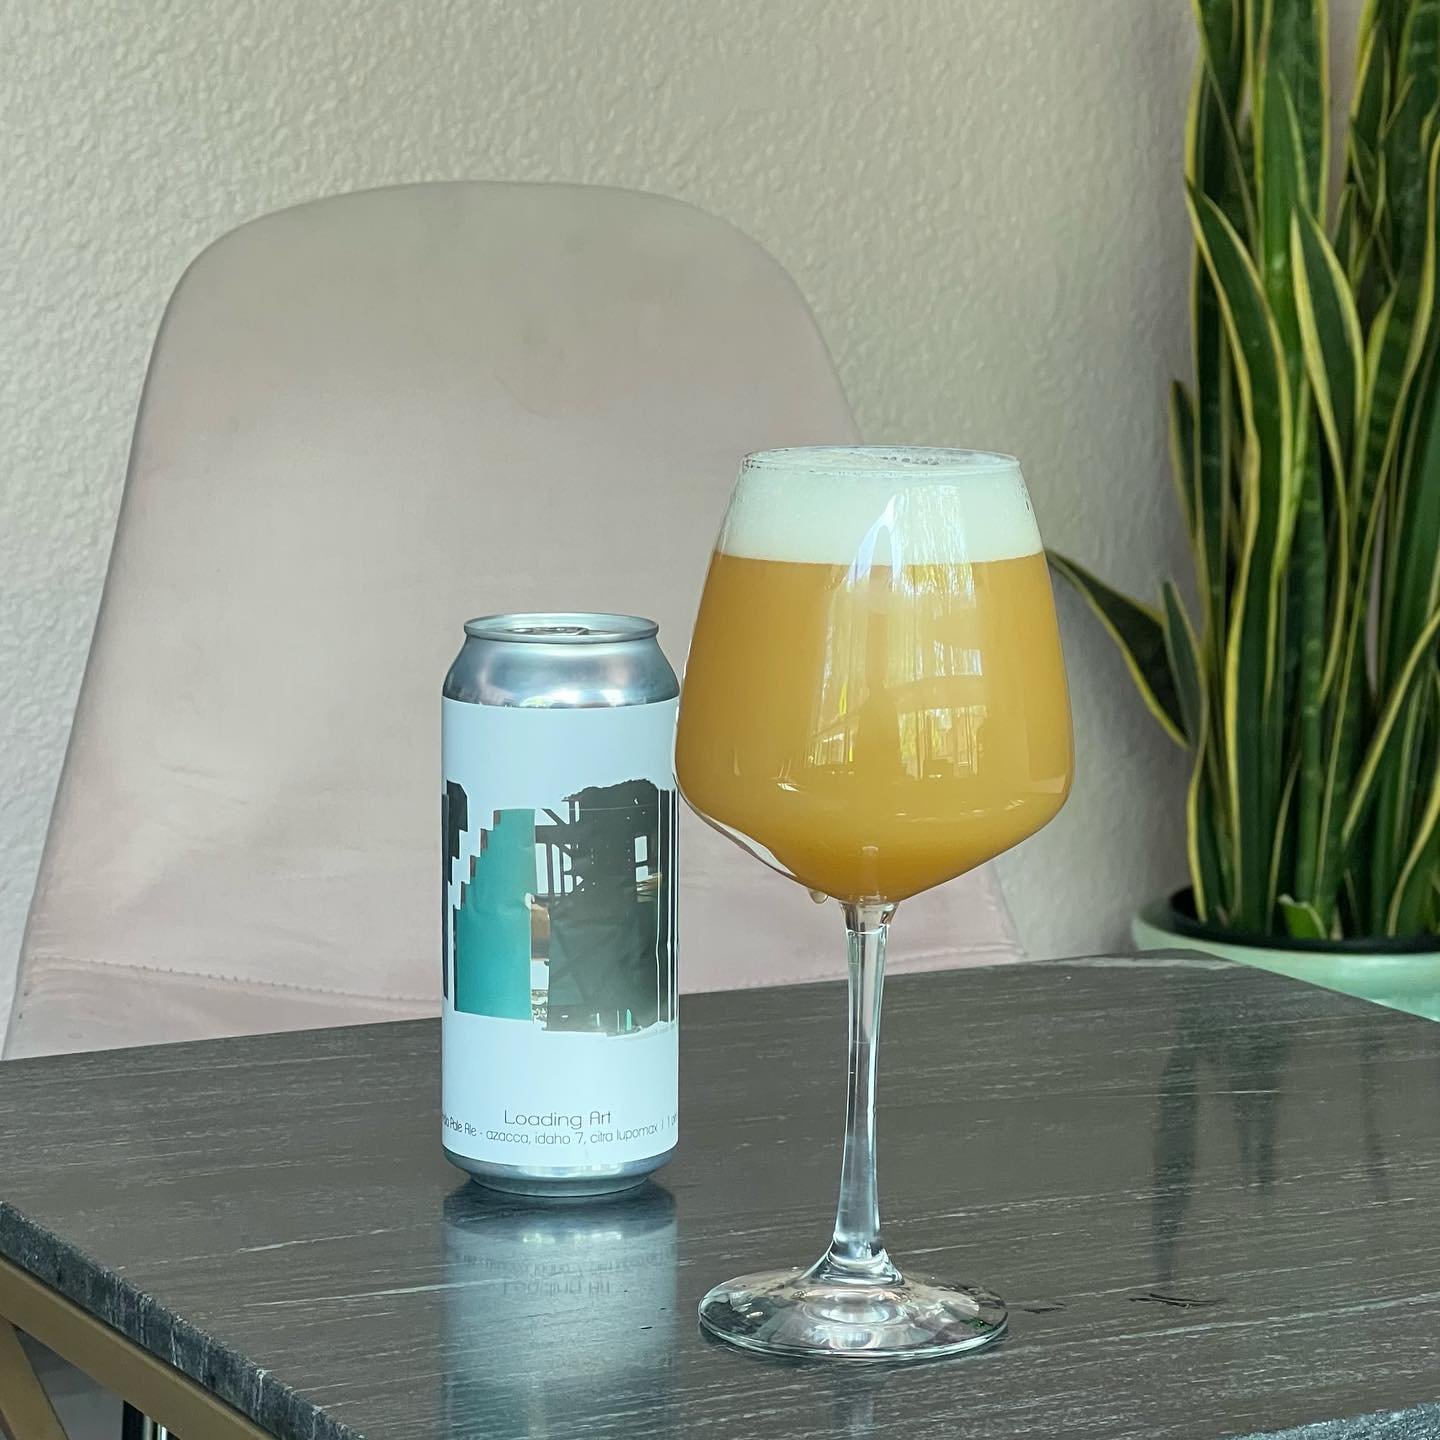 🔁Loading🔁Loading🔁Loading🔁

Our beloved, oat-forward, 7%, peach bomb of an IPA returns today on draft and in cans. 

Loading Art is dry hopped with a perfect blend of Azacca, Idaho 7, and Citra Lupomax to bring out rich and deep flavors of freshly